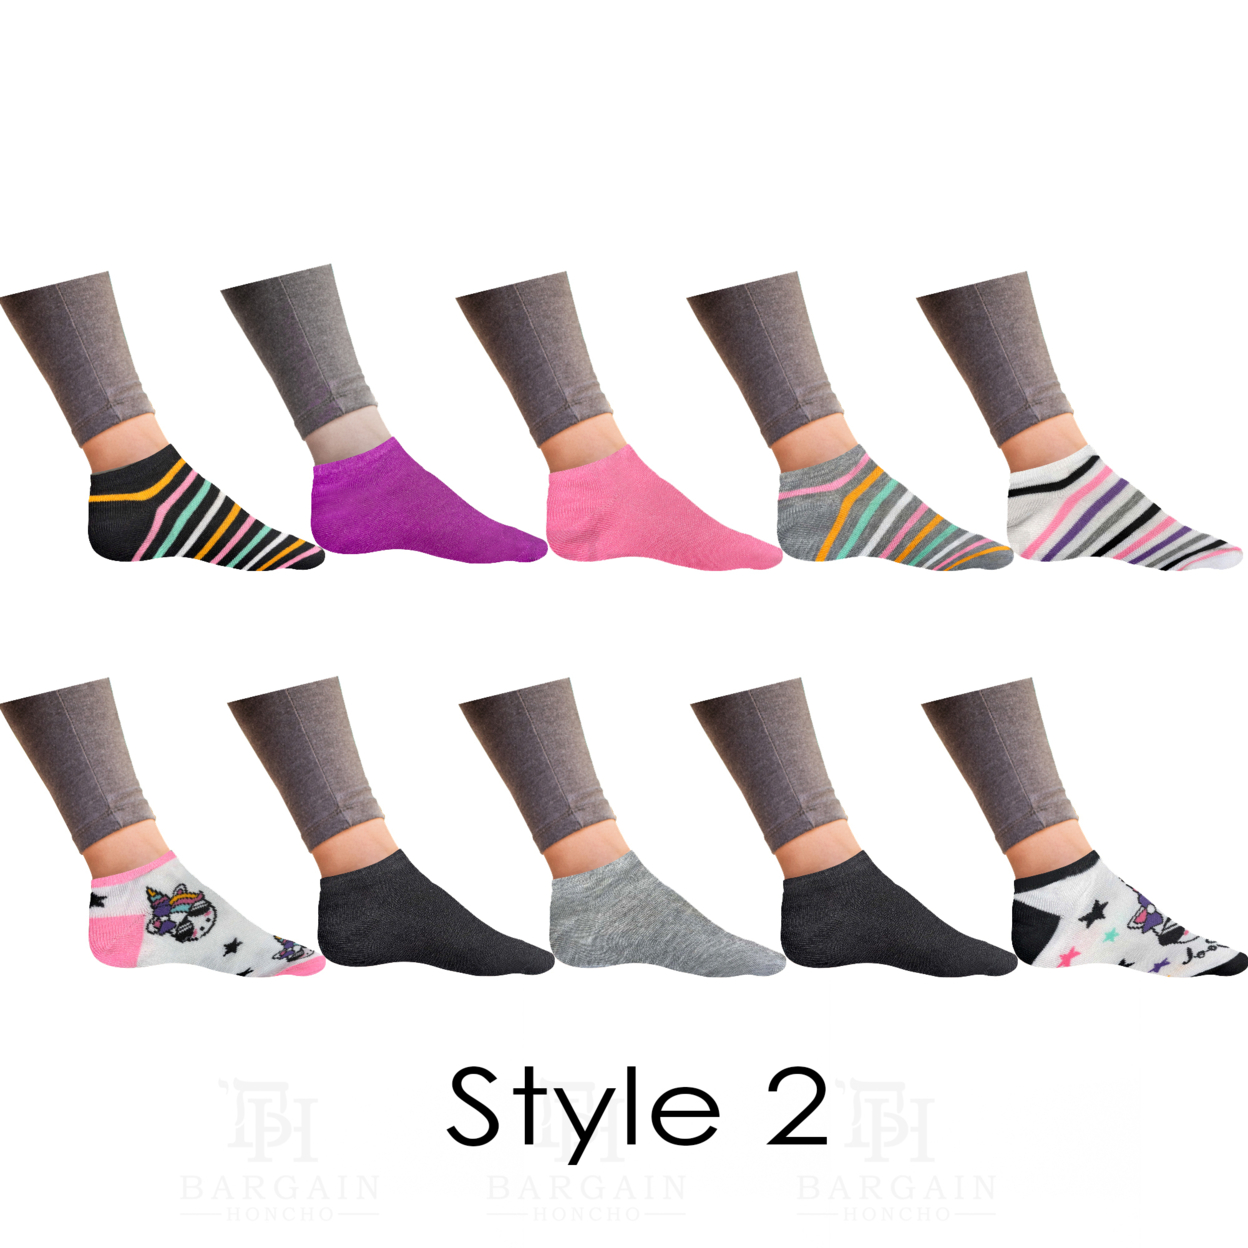 20-Pairs: Women’s Breathable Colorful Fun No Show Low Cut Ankle Socks - 3 & 6